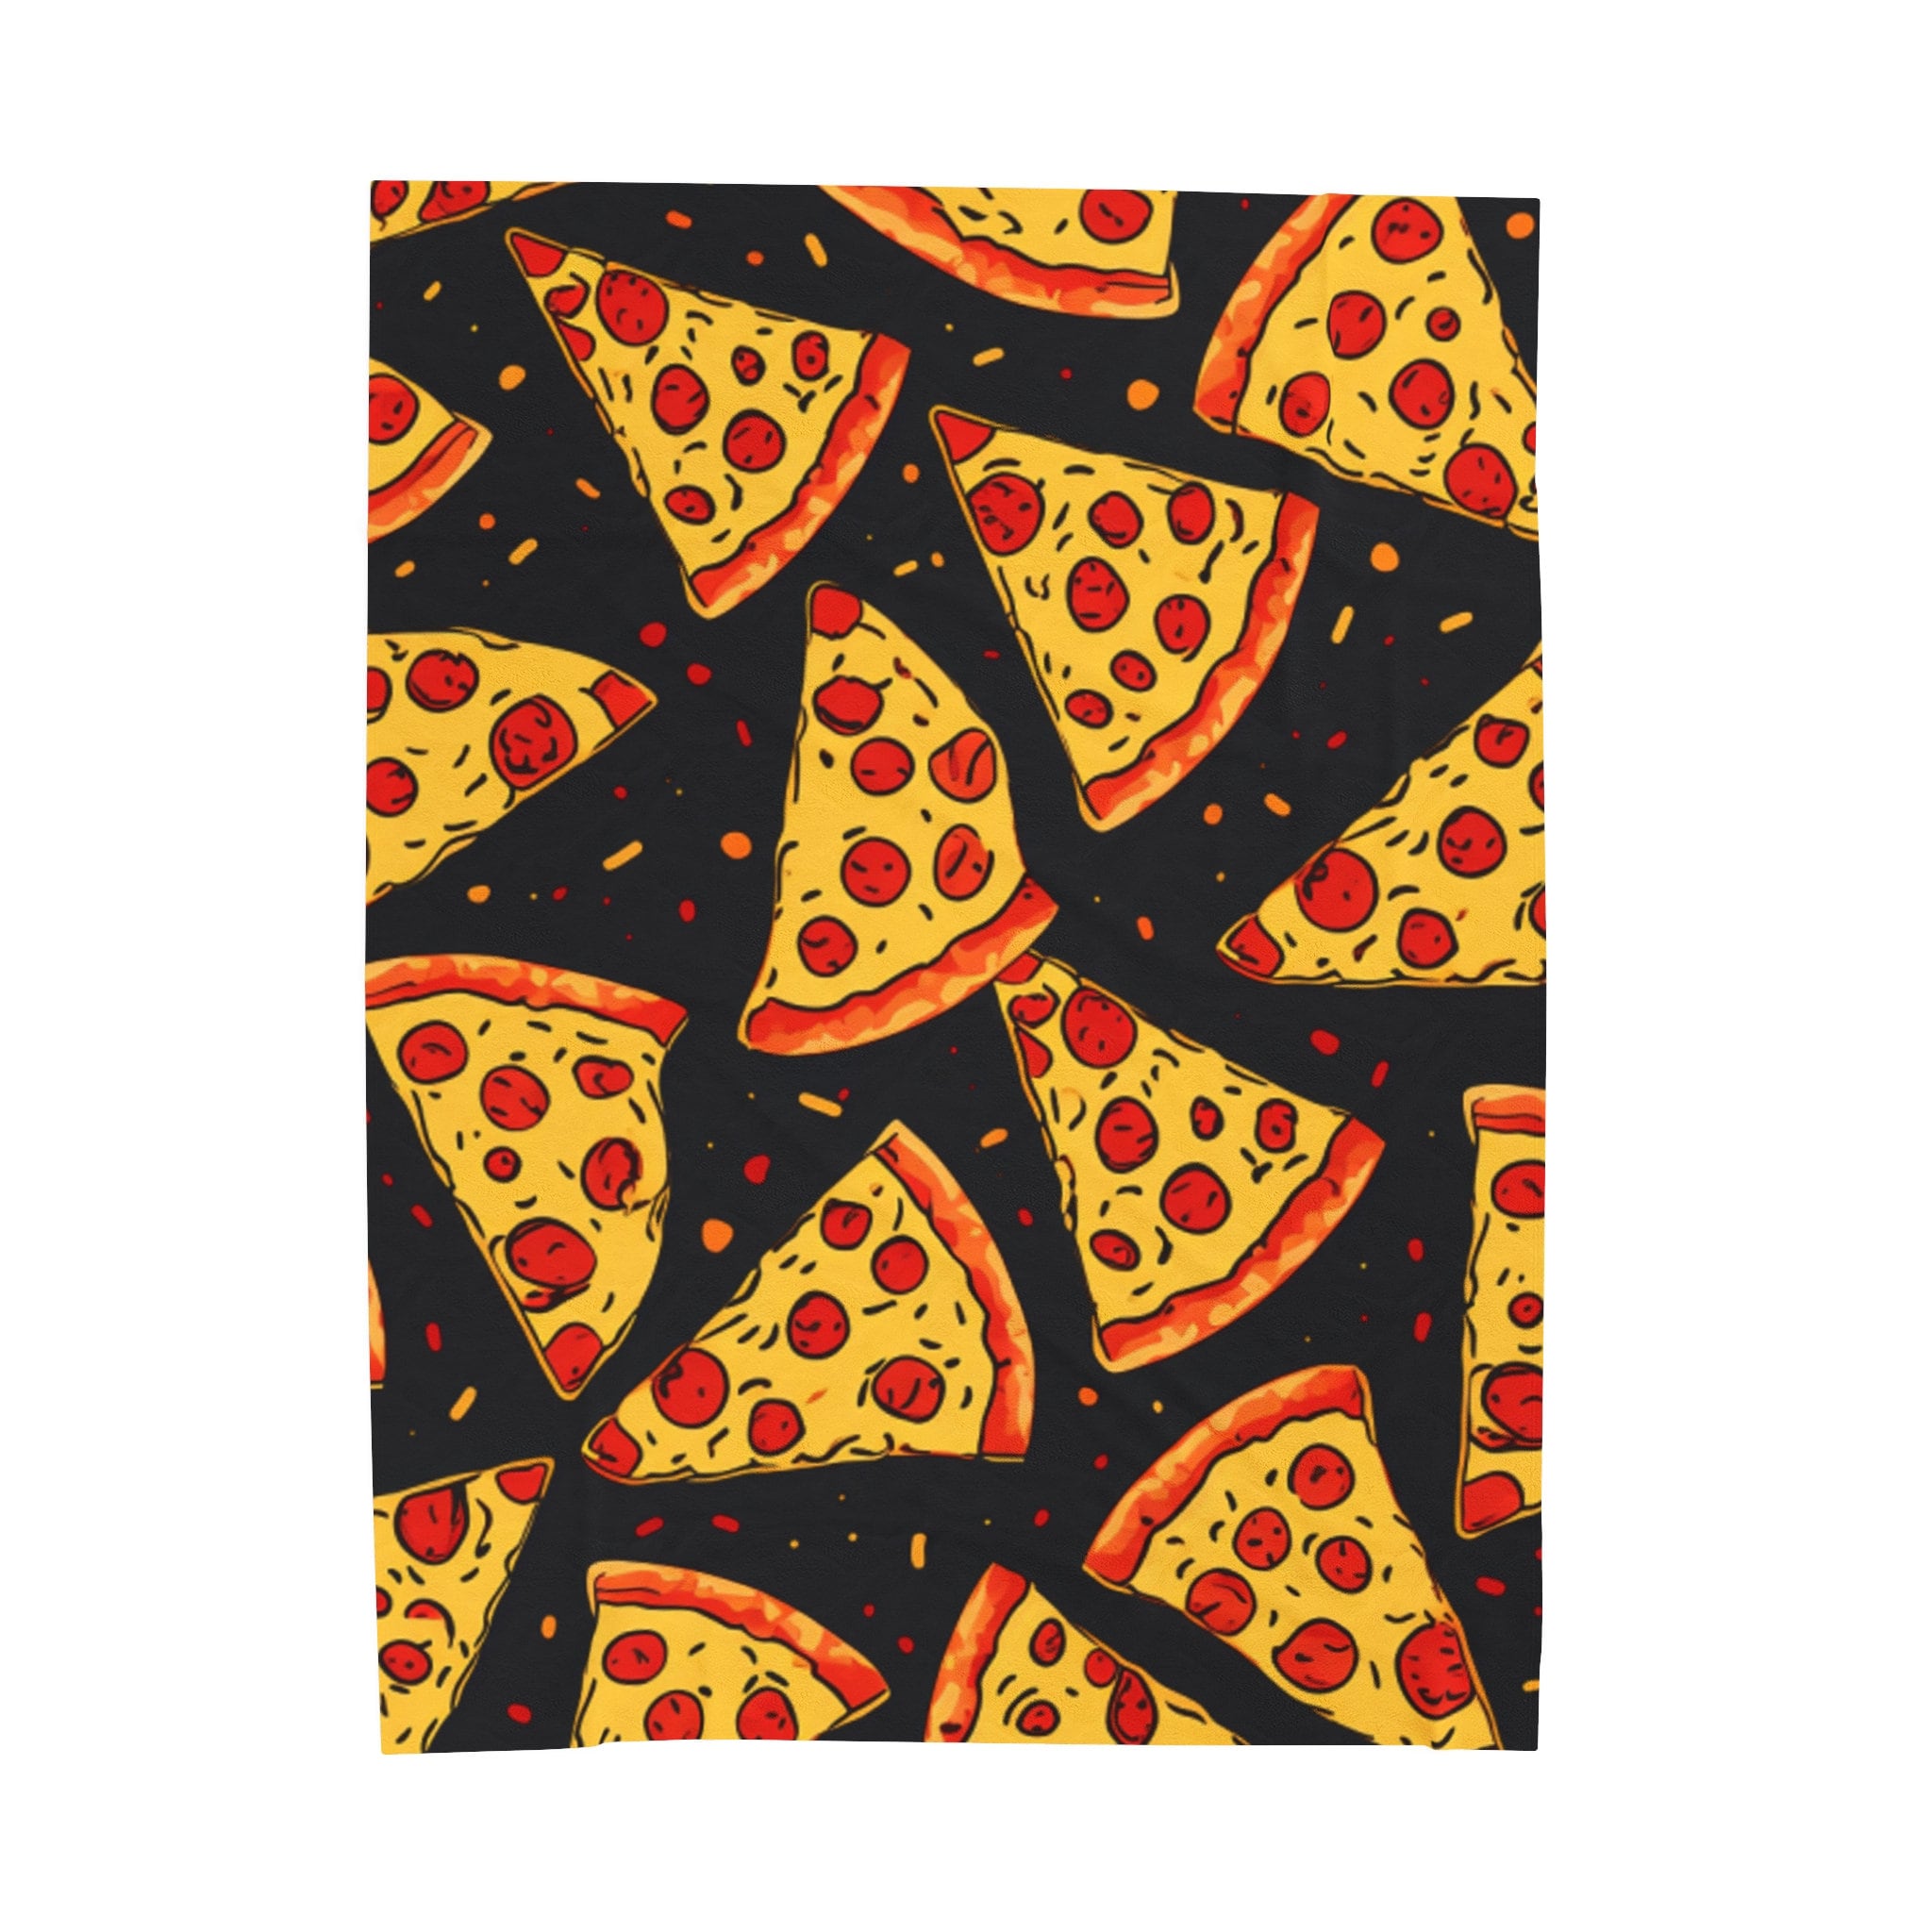 Pizza Slice Cocoon Blanket, MADE to ORDER, All Sizes, Baby Shower Gift,  Gift for Him, Gift for Her, Newborn Photo Prop, Best Seller 